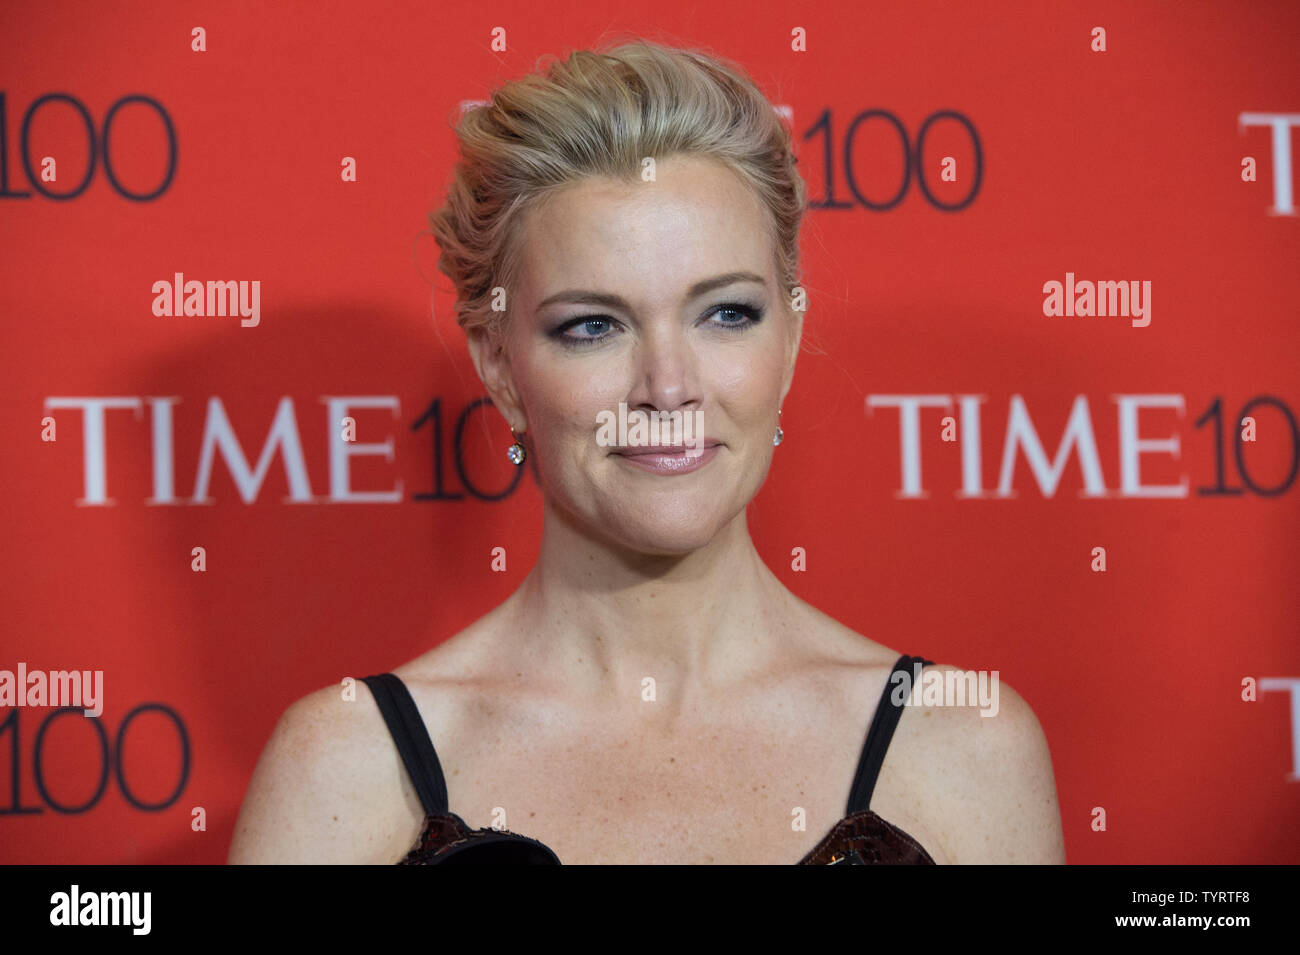 Megyn Kelly arrives on the red carpet at the TIME 100 Gala at Frederick P. Rose Hall, Home of Jazz at Lincoln Center, in New York City on April 26, 2017. TIME 100 celebrates TIME Magazine's list of the 100 Most Influential People in the World.      Photo by Bryan R. Smith/UPI Stock Photo